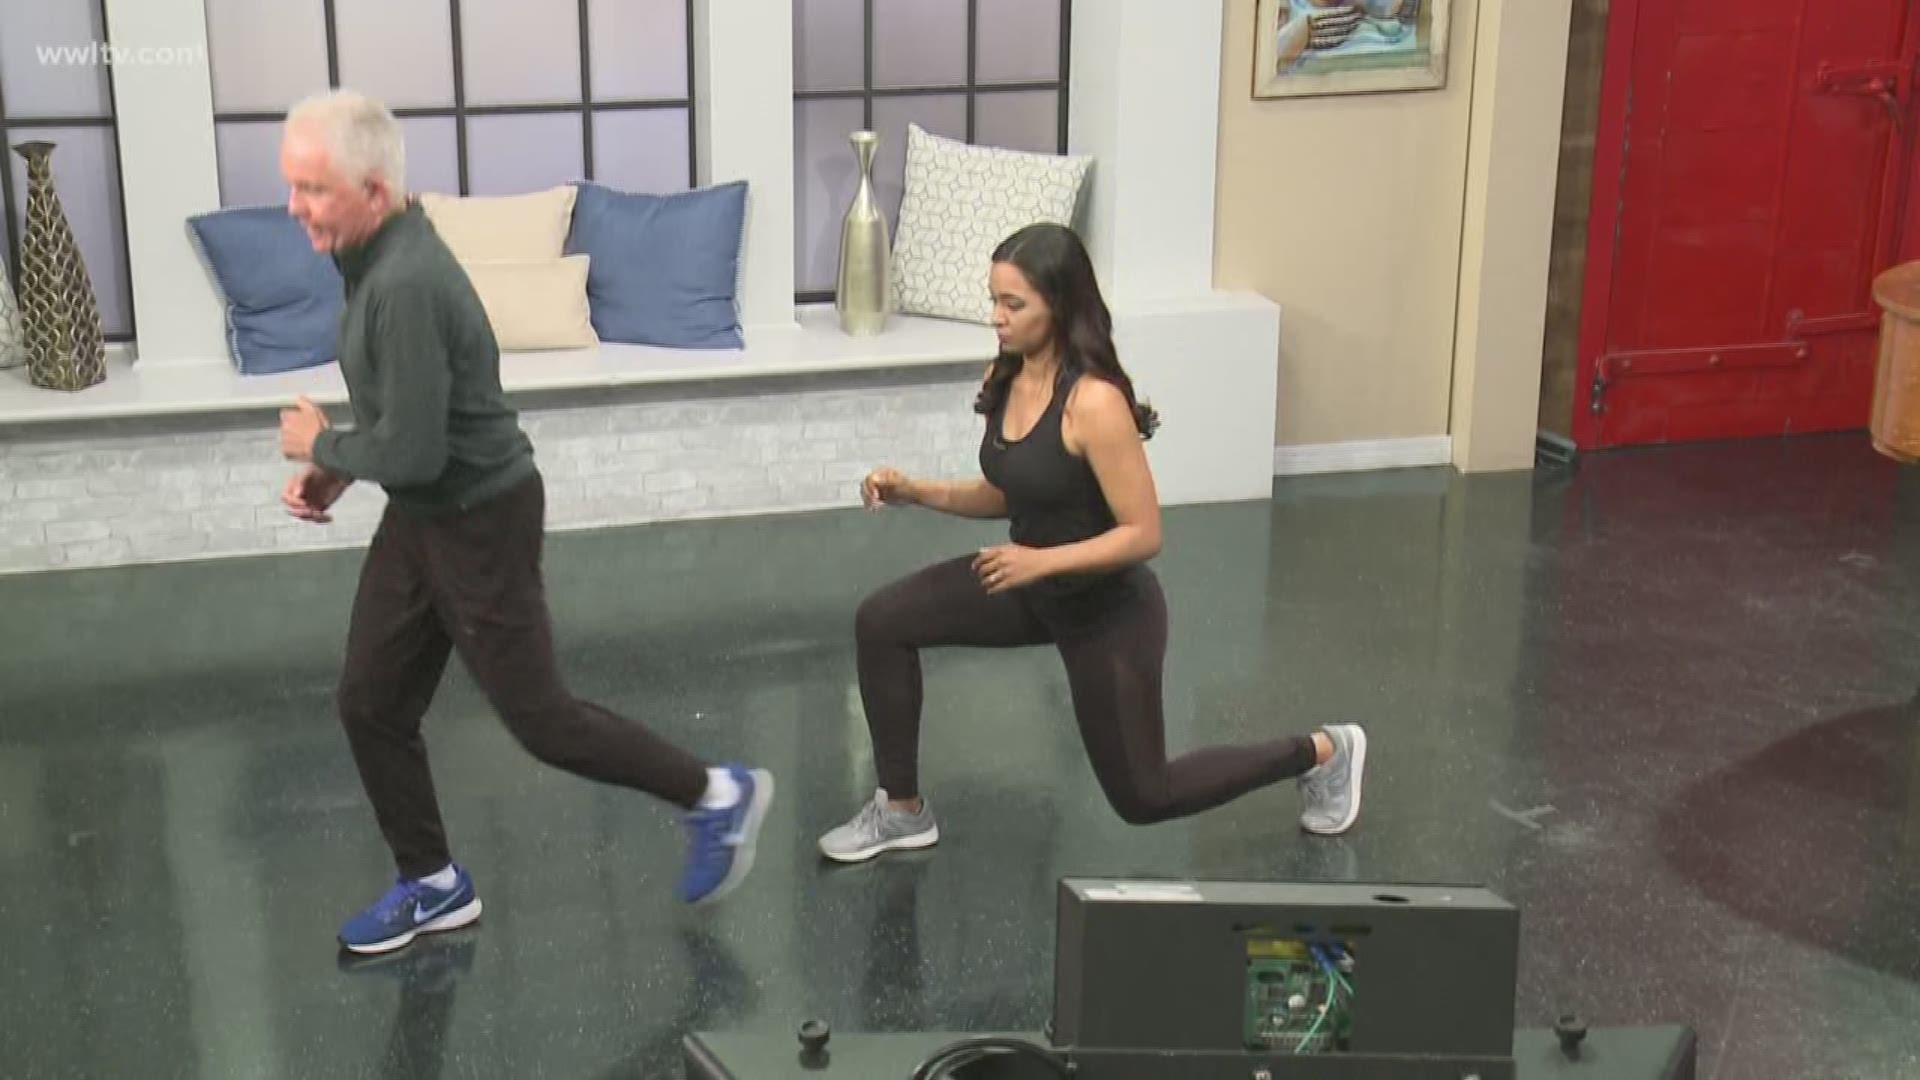 Mackie and April has a dance routine with lunges that can help tone your thighs and butt.